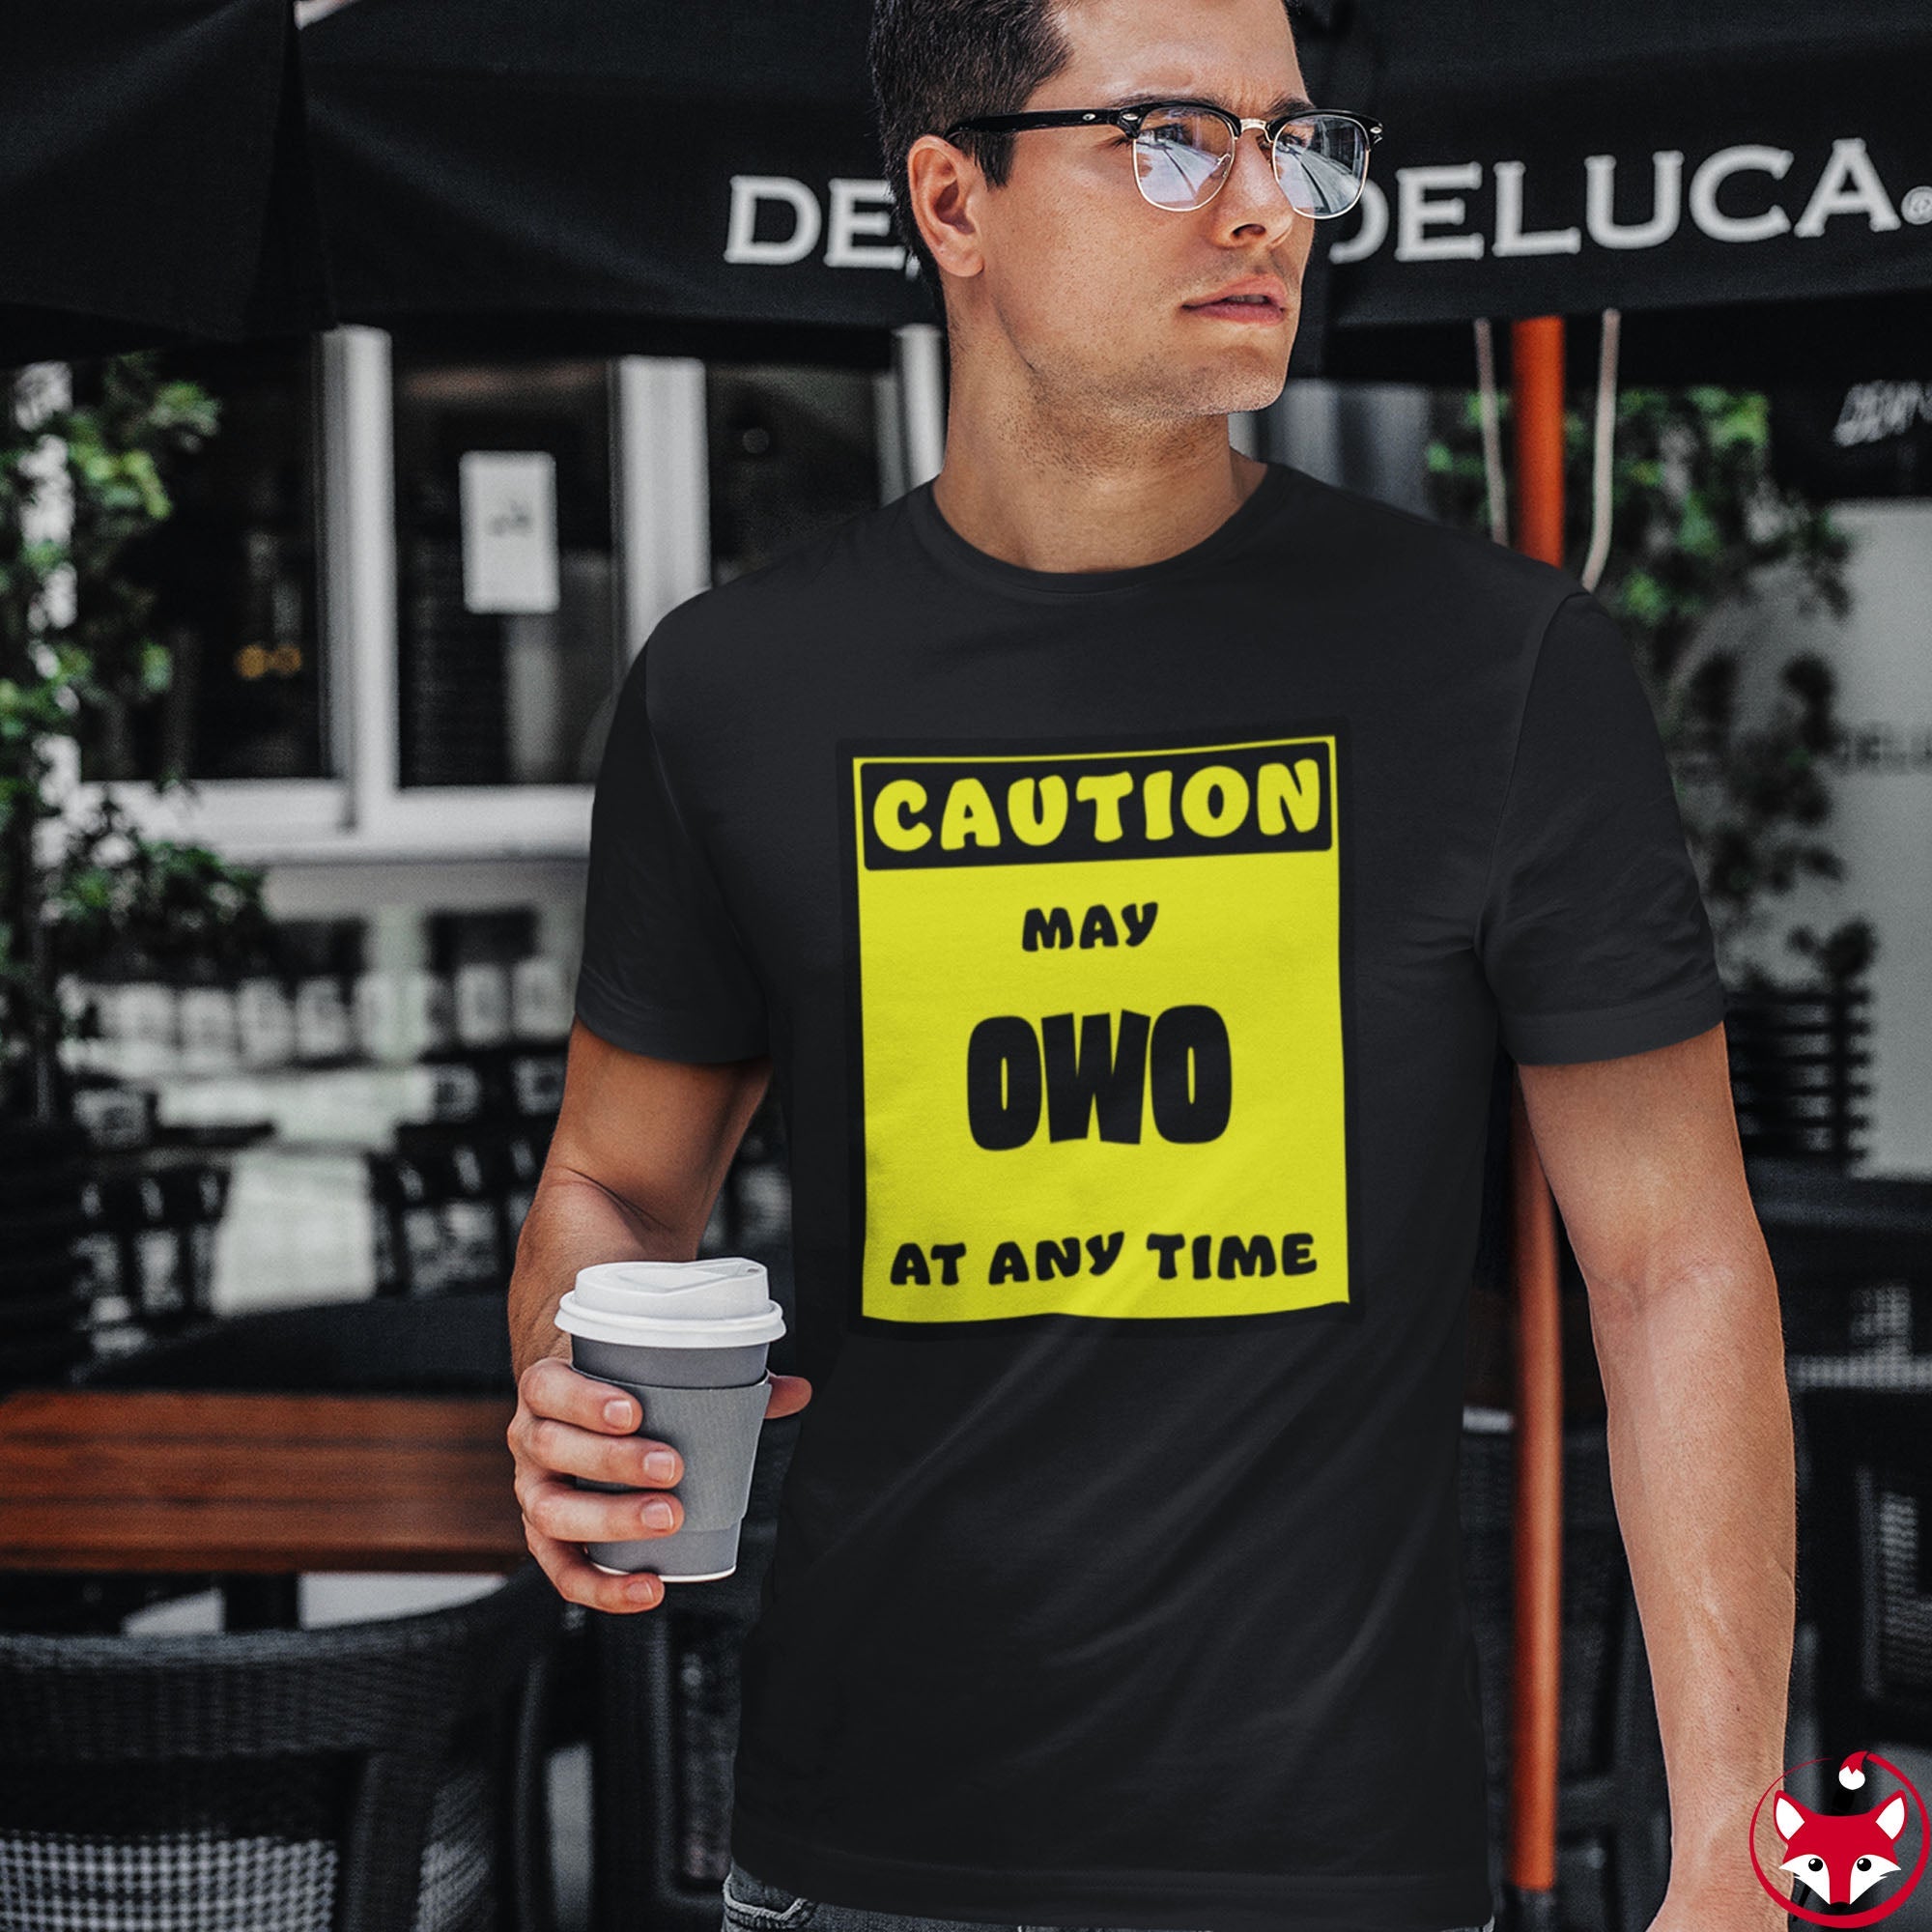 CAUTION! May OWO at any time! - T-Shirt T-Shirt AFLT-Whootorca 